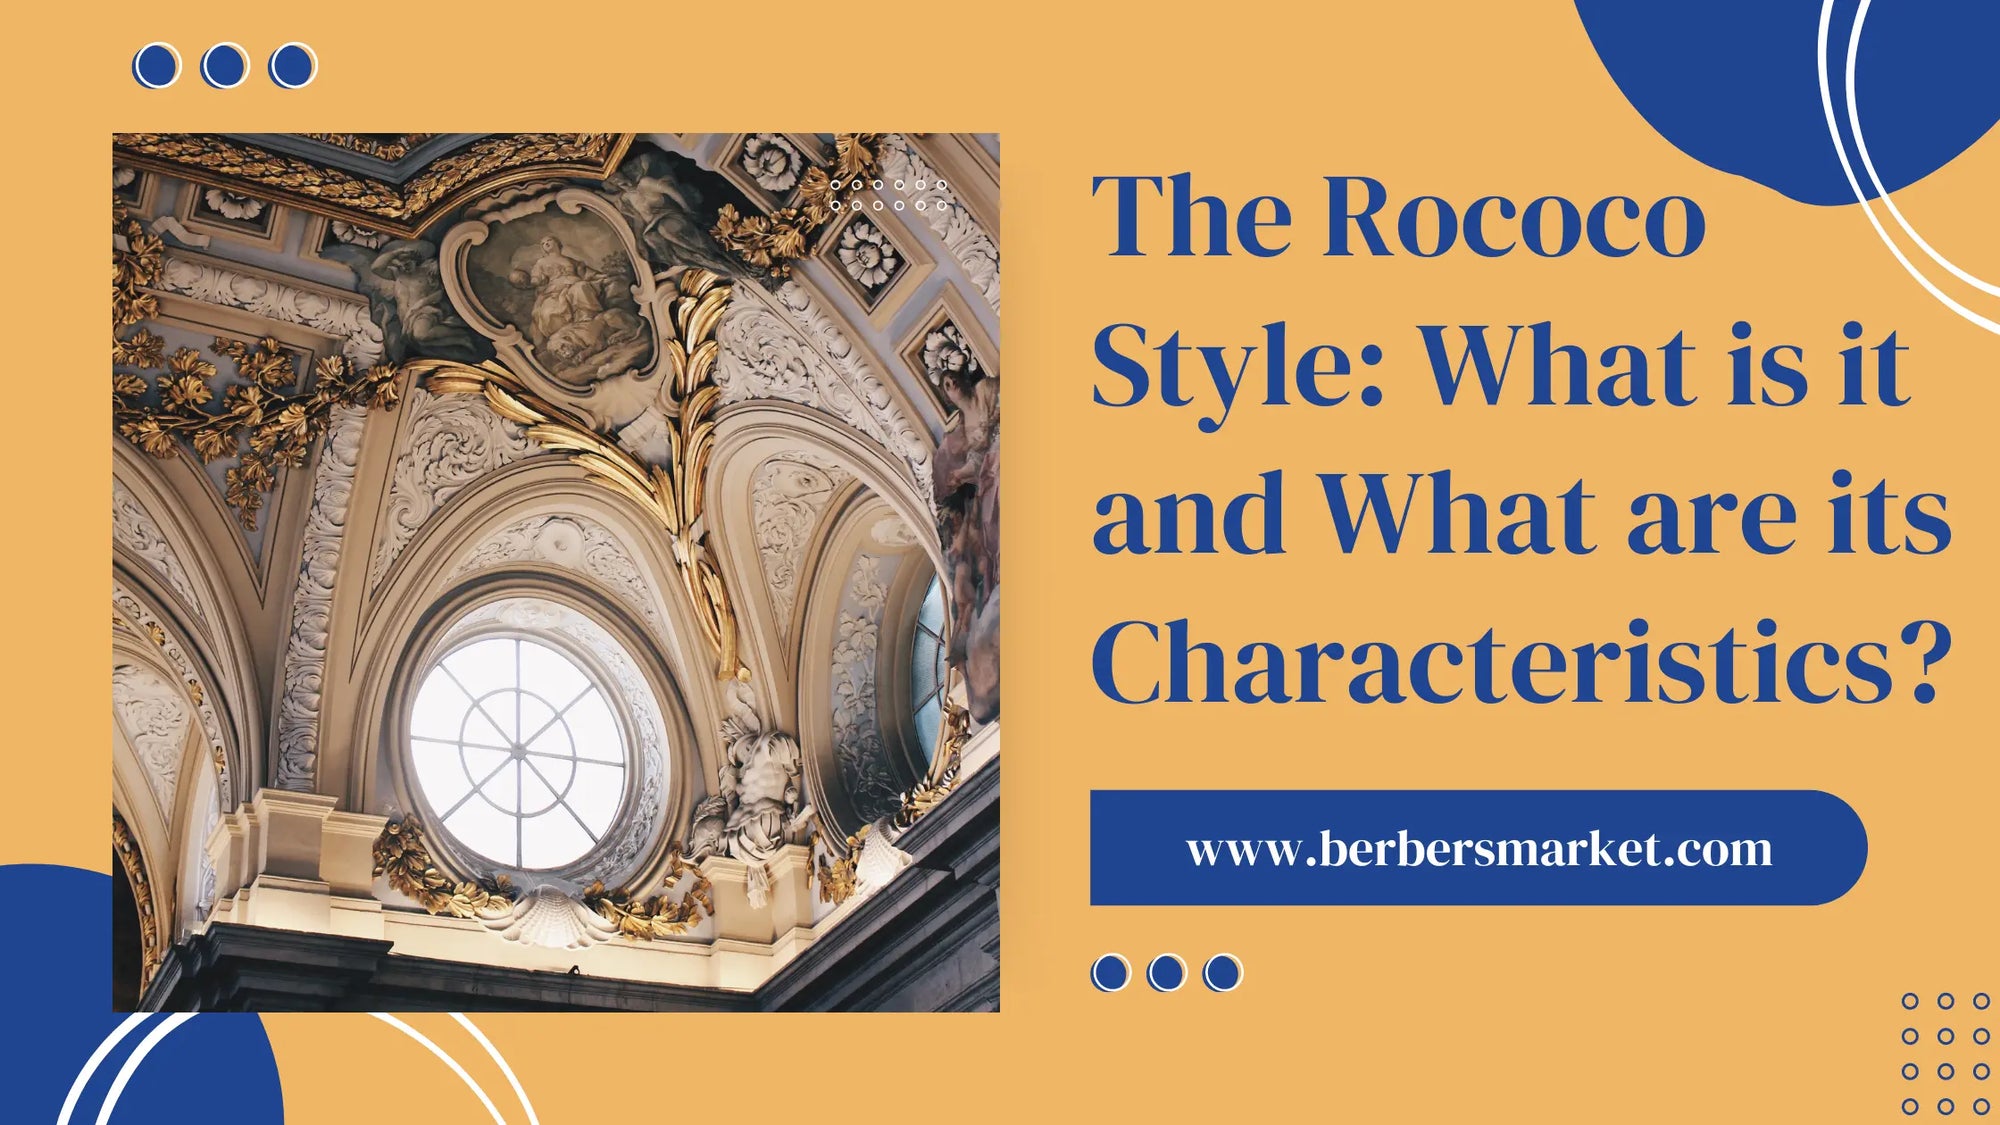 Blog banner talking about: "The Rococo Style: What is it and What are its Characteristics?" with a picture showing a rococo style plaster work roof.